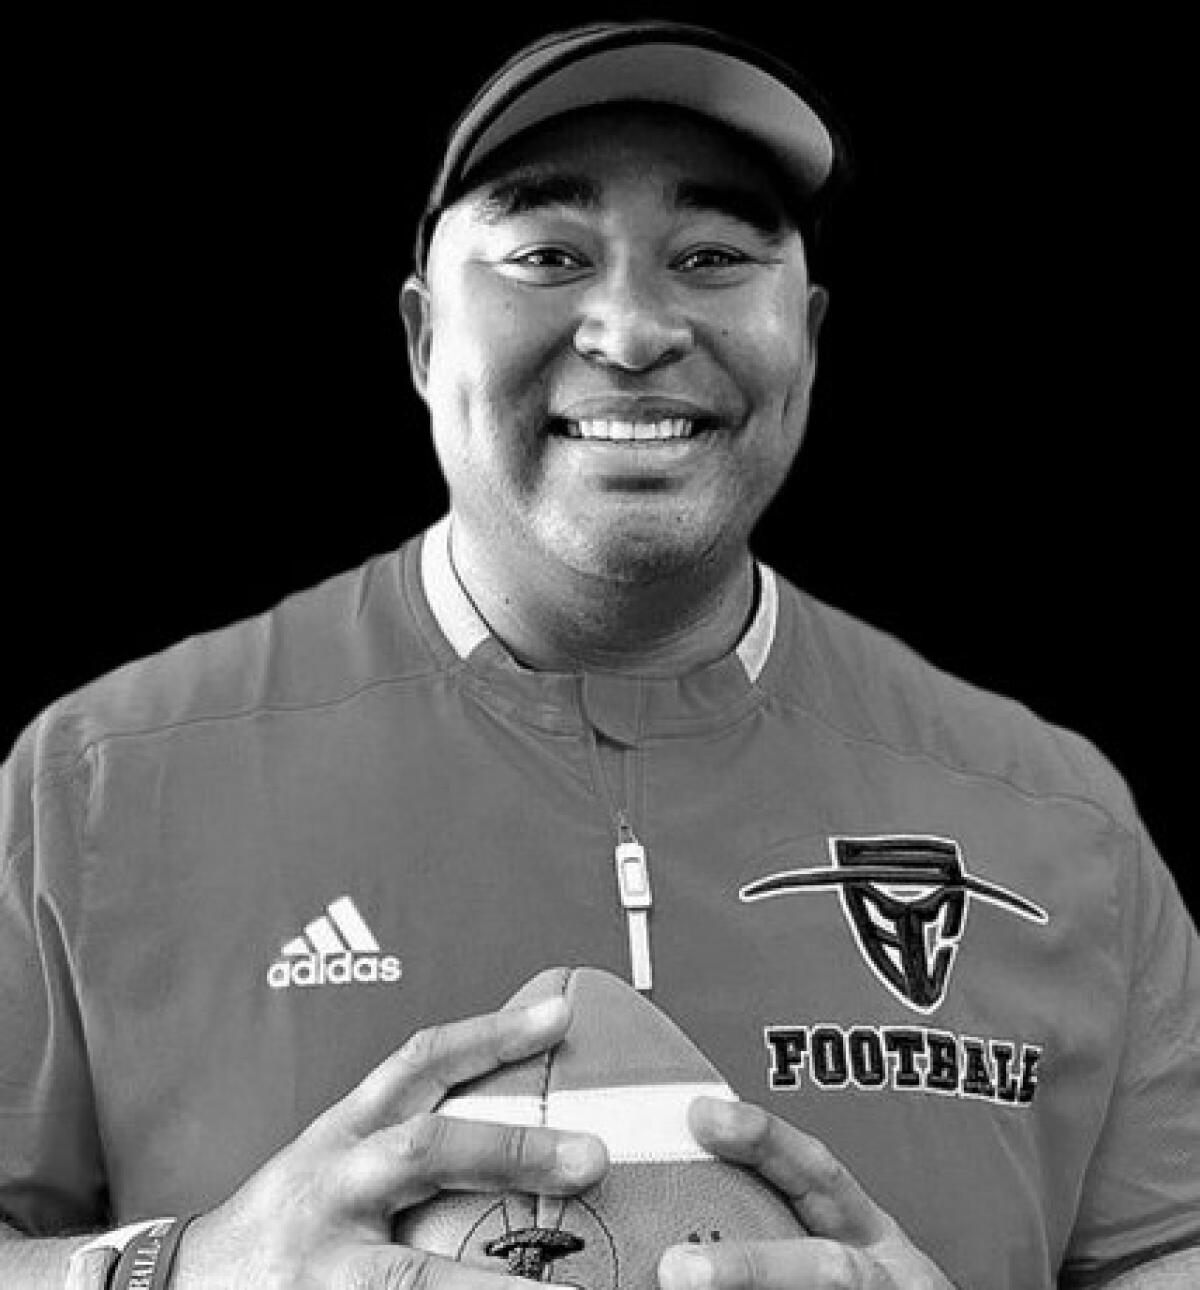 Santa Ana College football coach Anthony White poses for a photo clasping a ball in his hands.